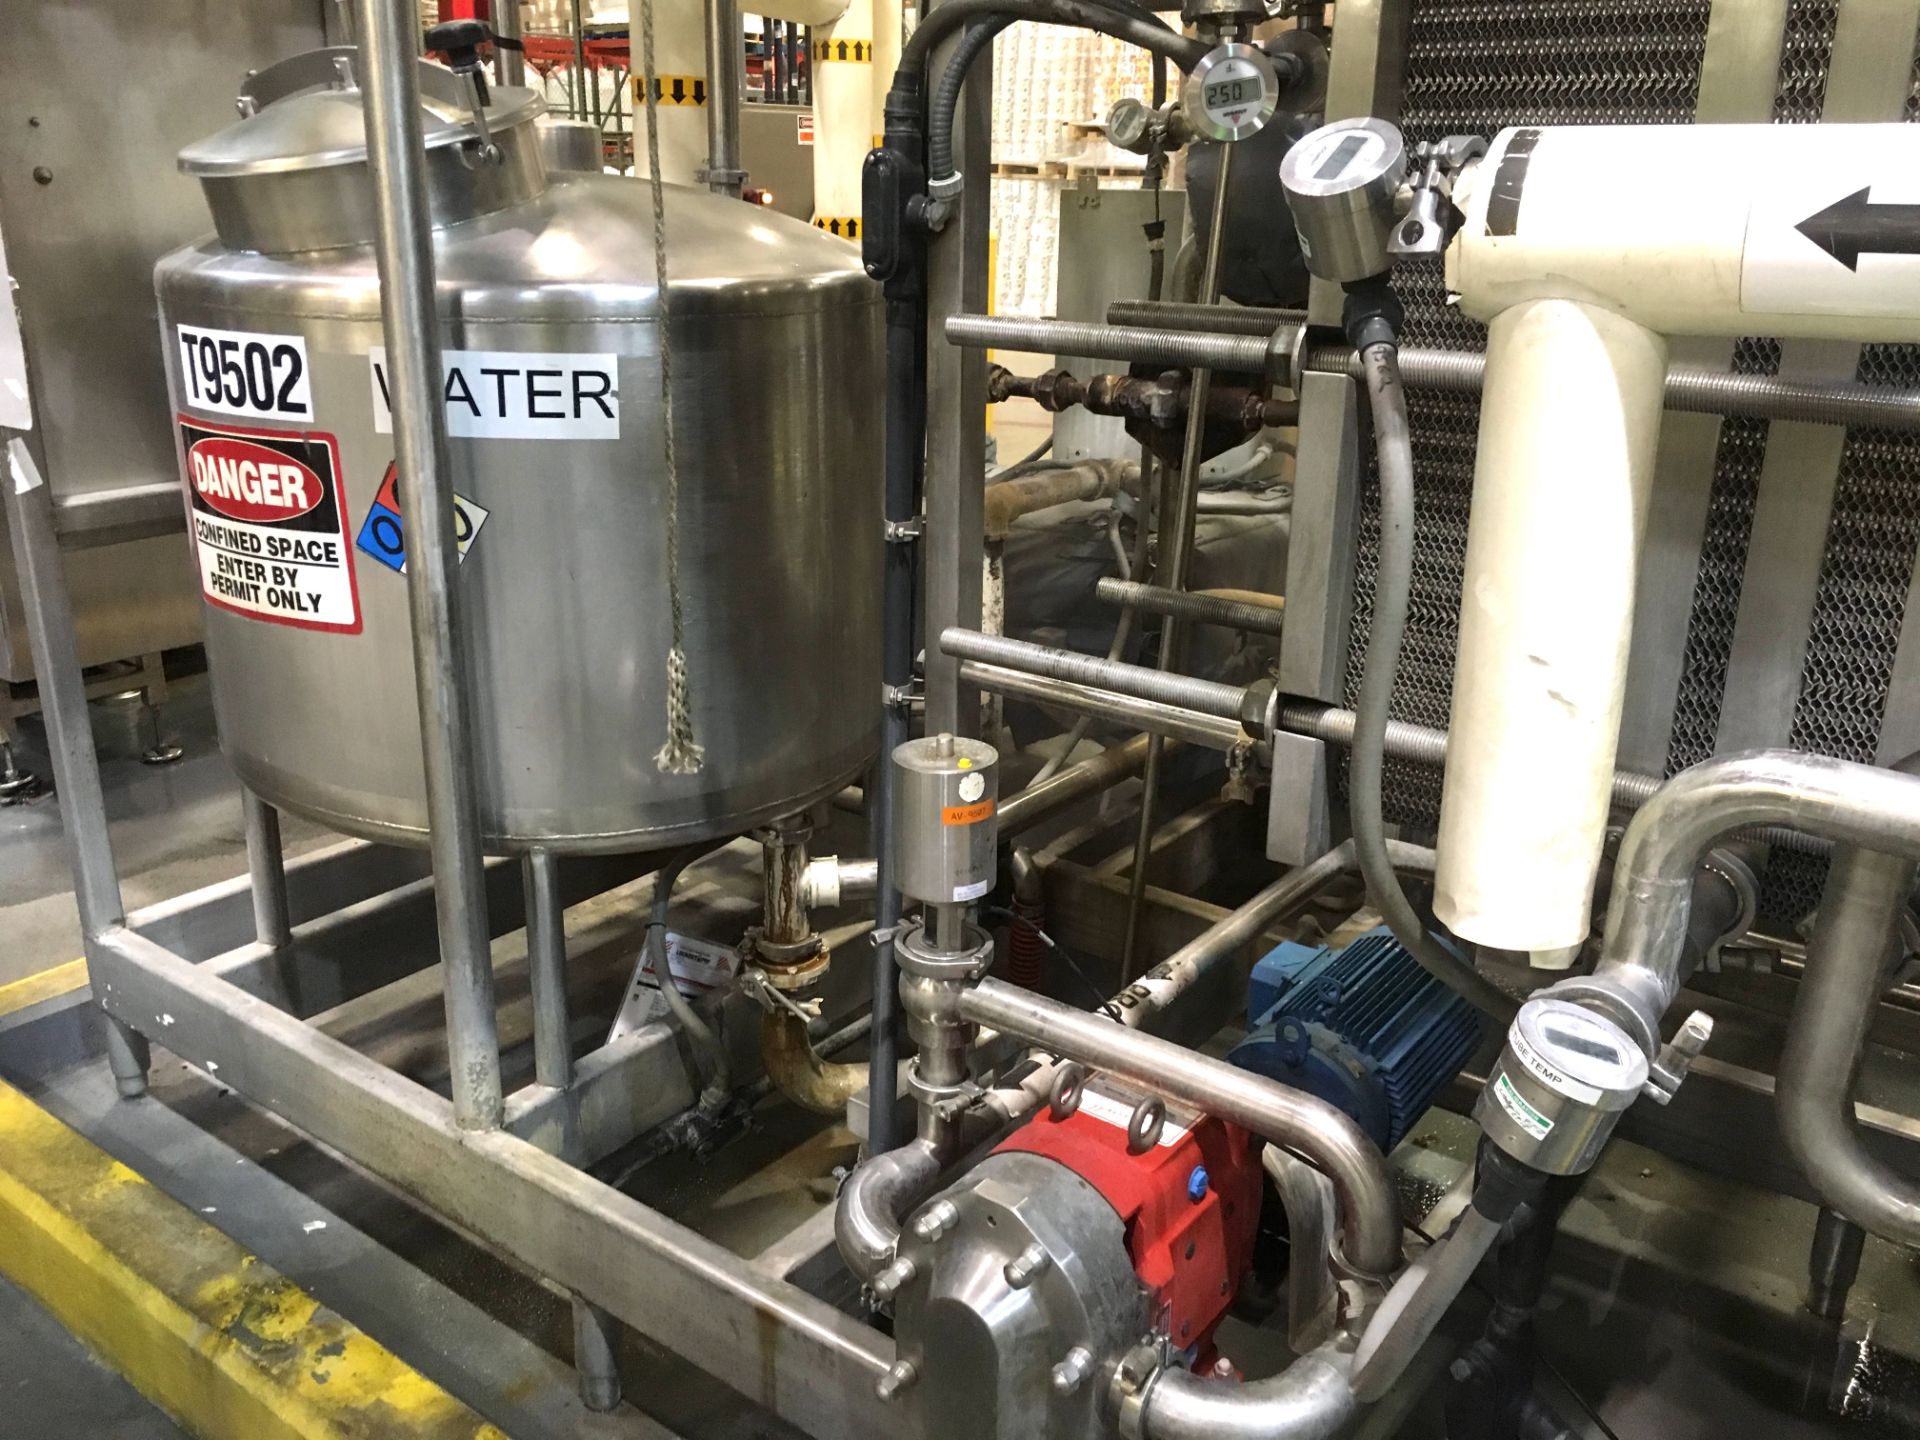 Skid Mounted HTST Pasteurization System for Hot Fill, Setup for Juice at 25 gallons per minute at - Image 8 of 14